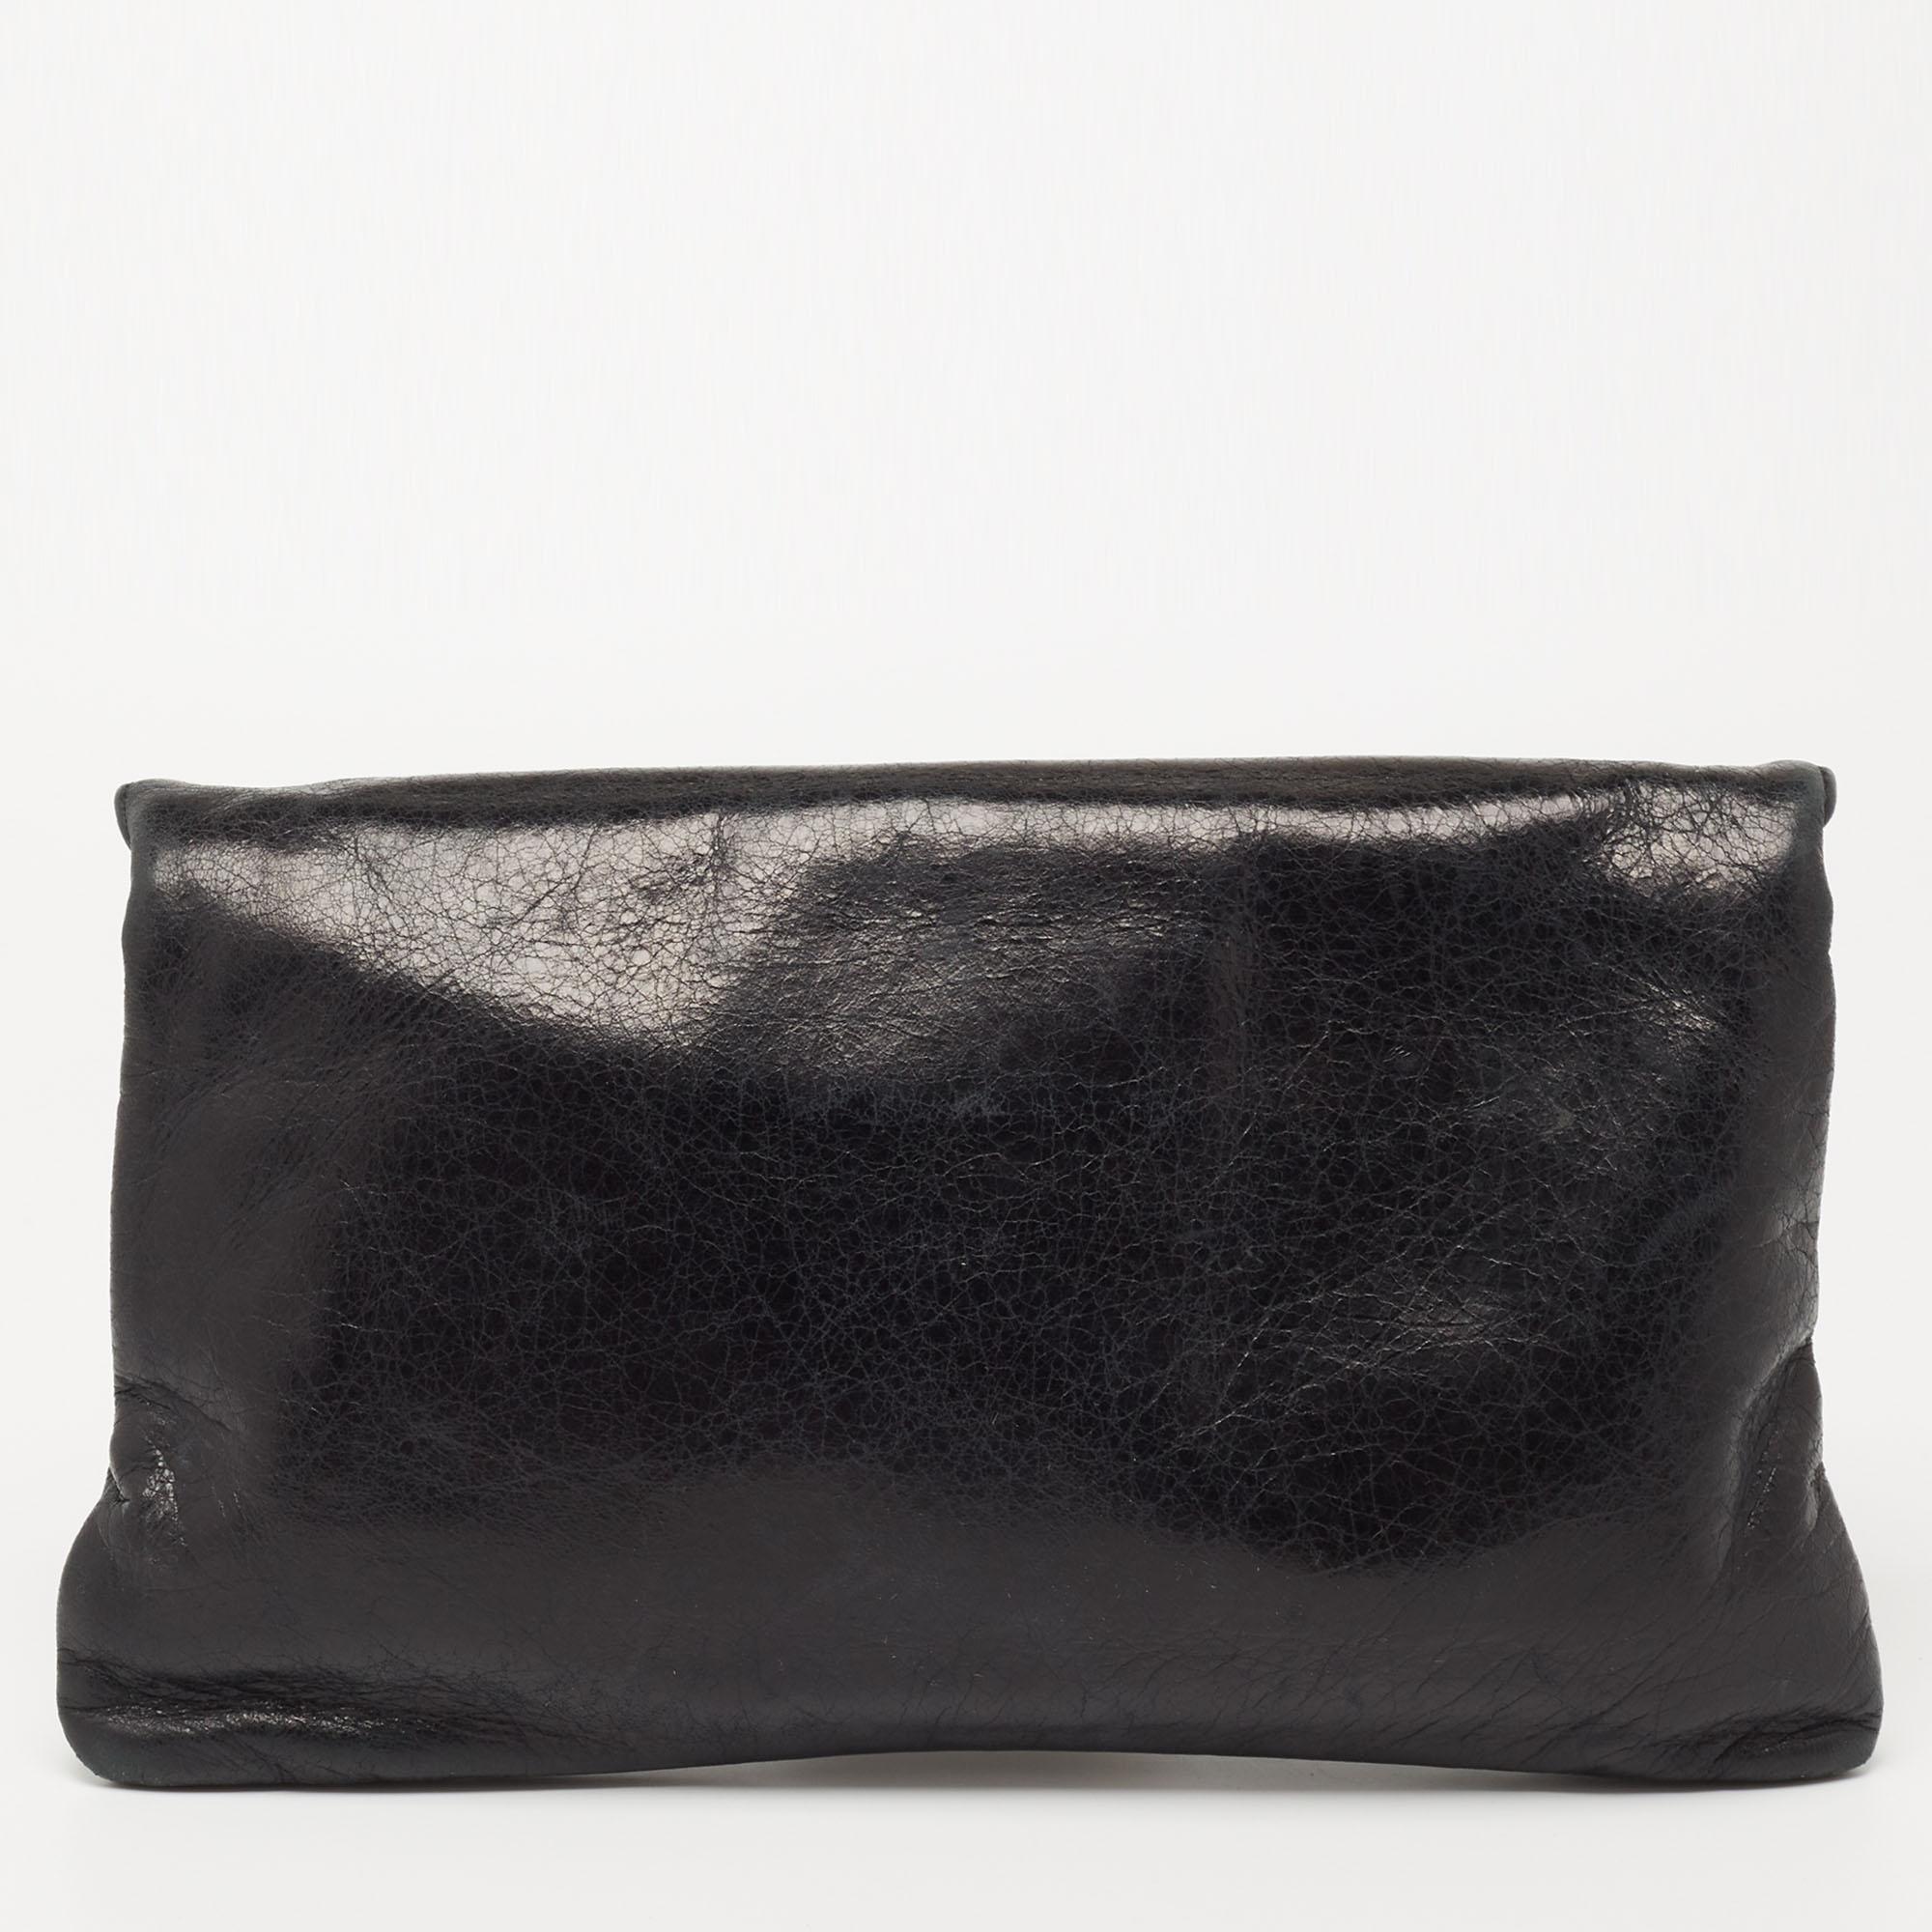 This Balenciaga clutch is as fancy as practical. Created from leather, the silver-tone studs make it undeniably chic and it flaunts an external zipper pocket on the folded top. The fabric-lined interior of this creation will comfortably carry your